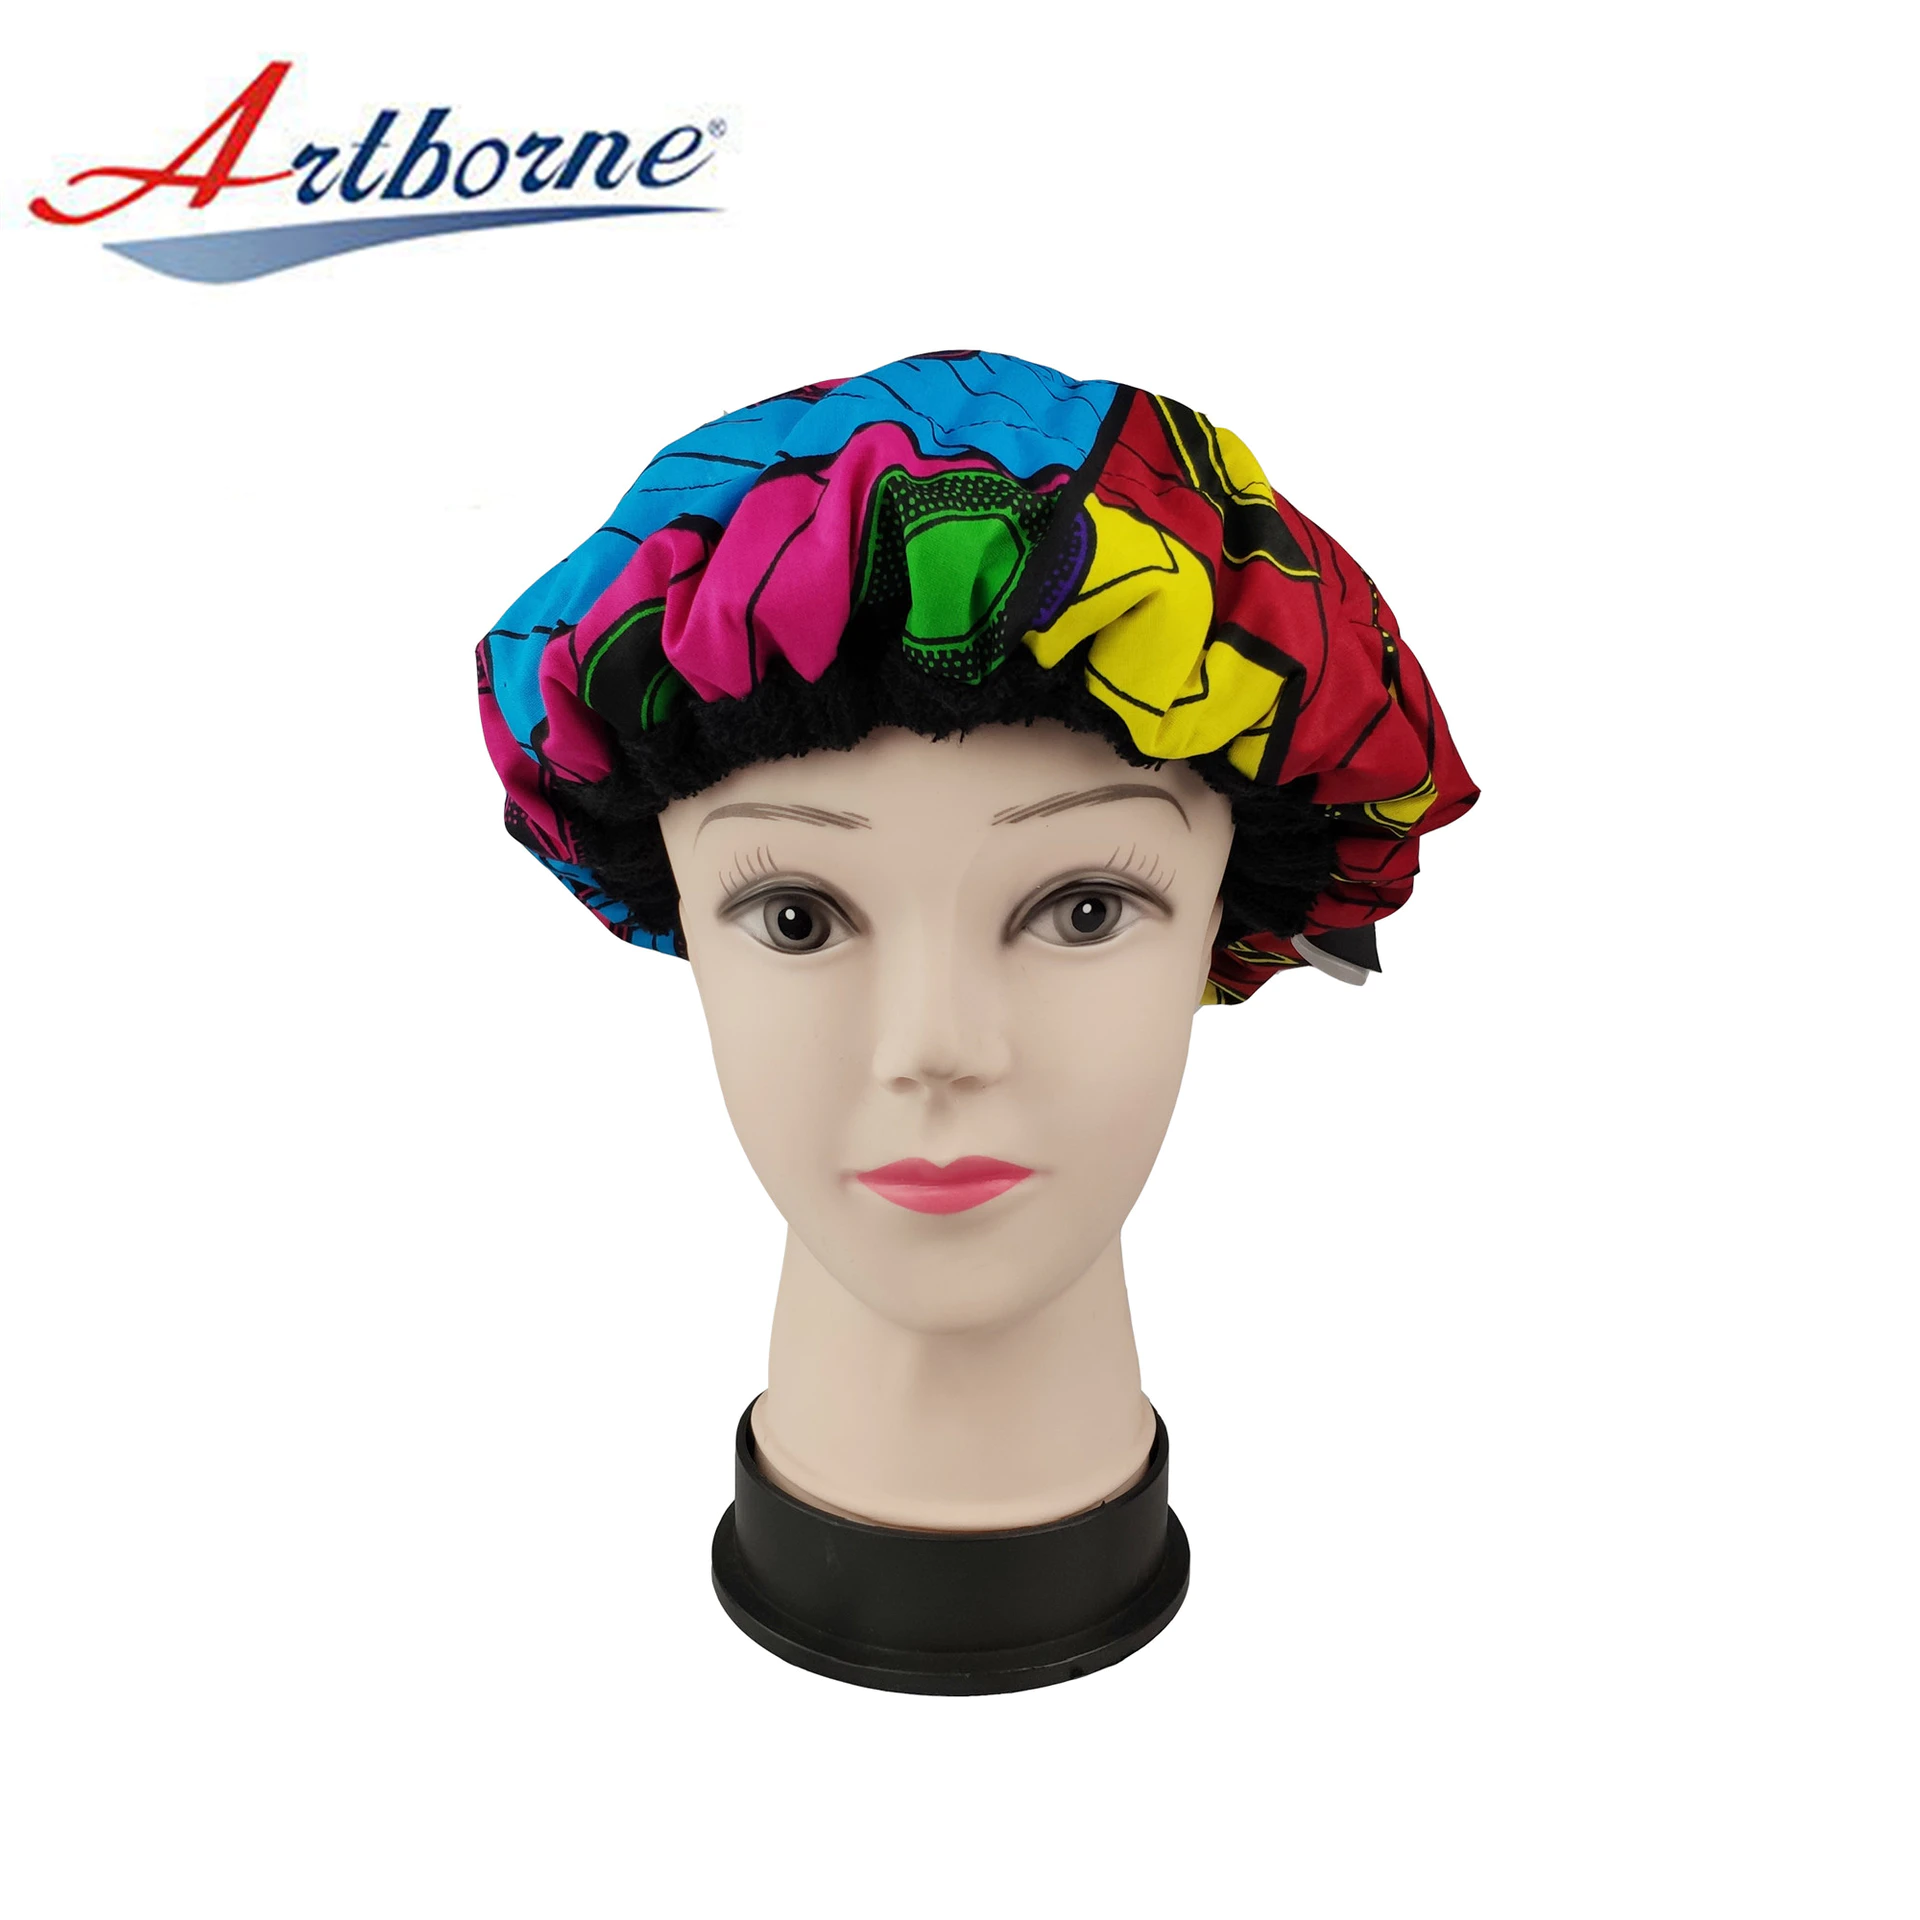 Artborne custom thermal cap for hair treatment and deep conditioning for business for hair-35